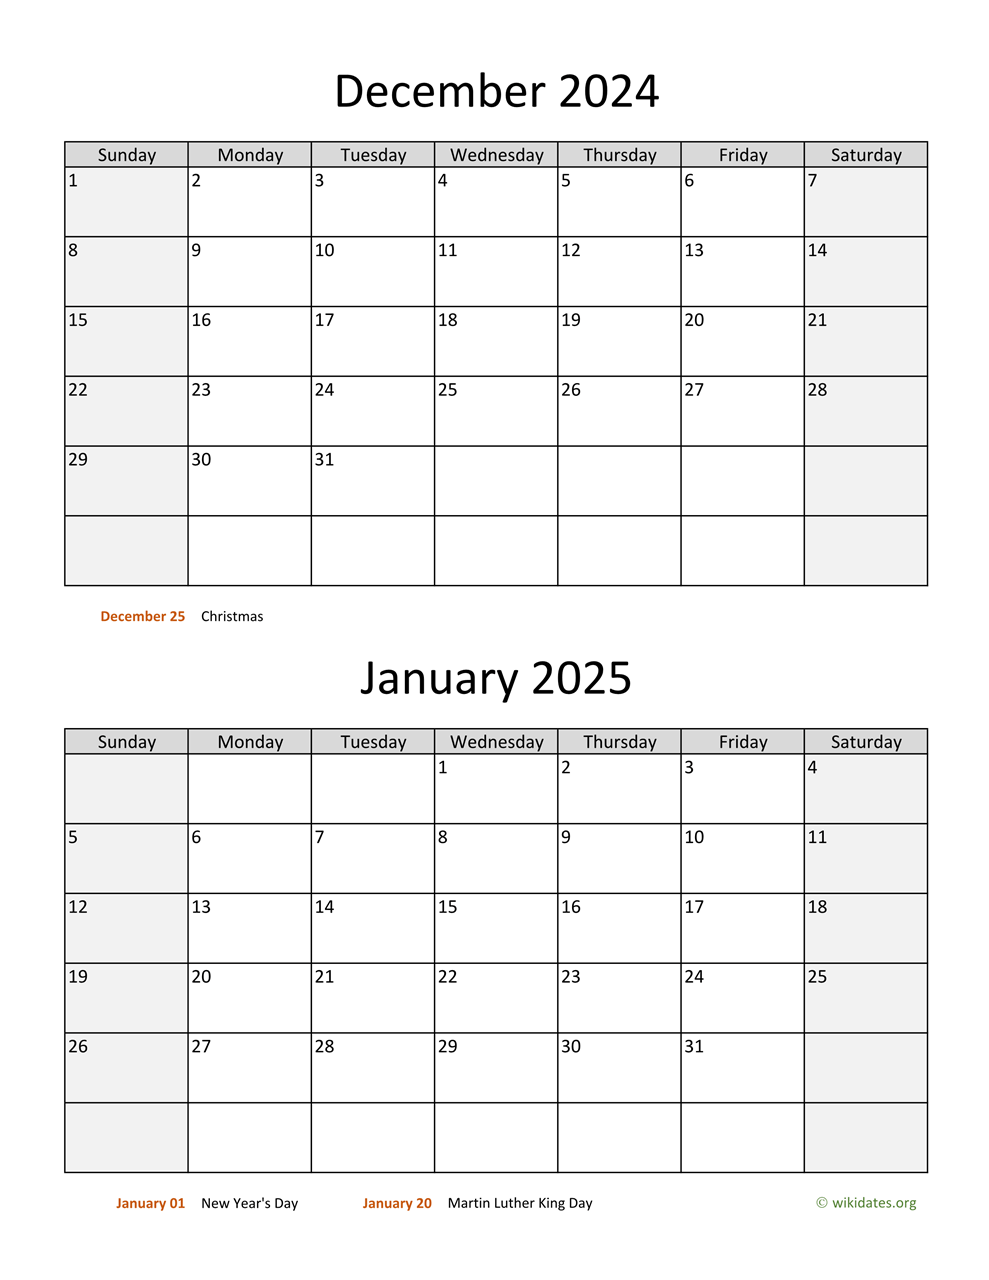 December 2024 And January 2025 Calendar | Wikidates for Printable Calendar January To December 2024